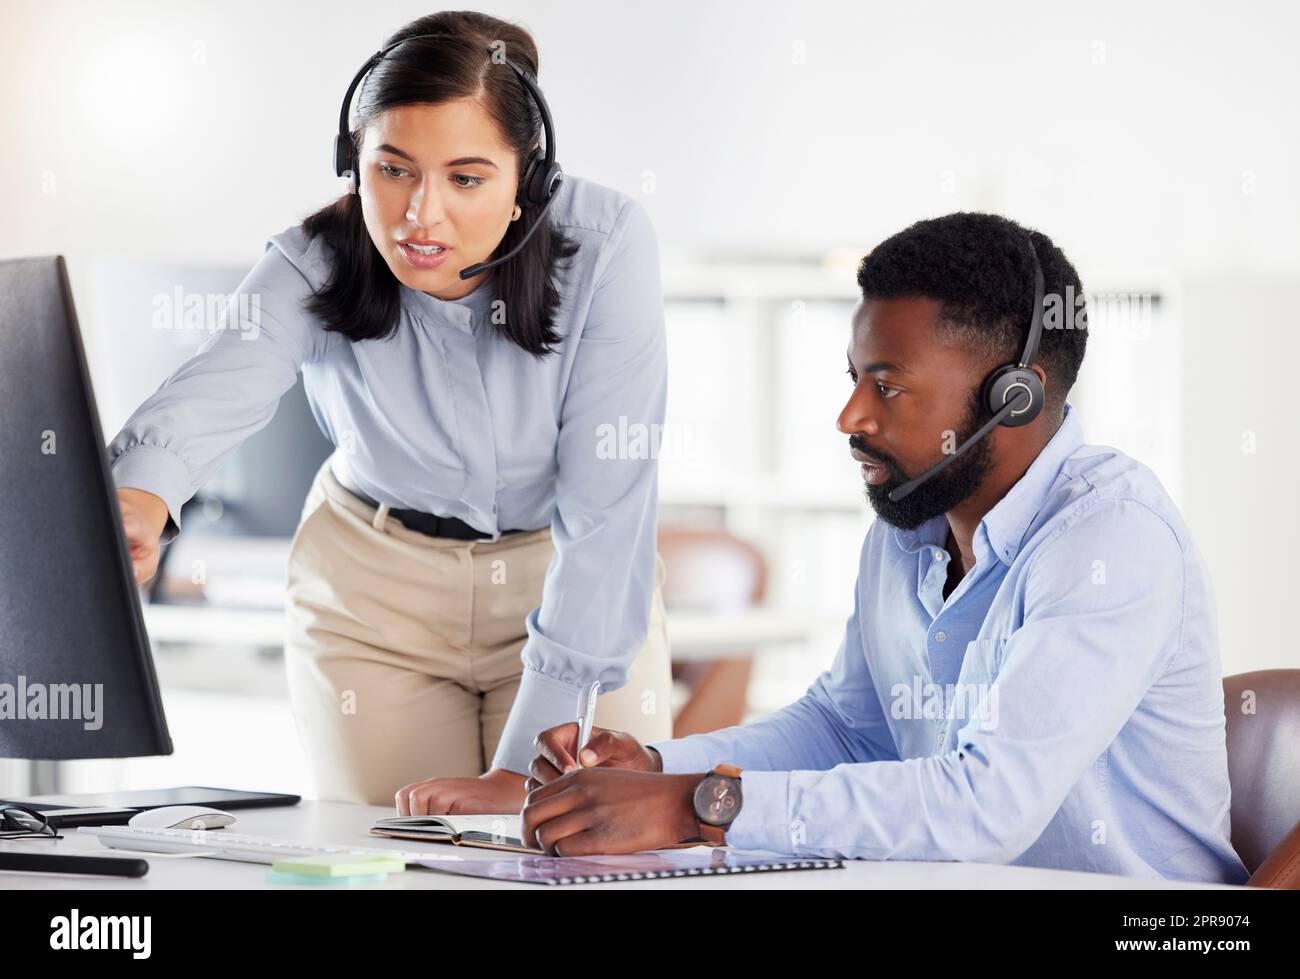 Young caucasian call centre telemarketing agent training new african american assistant on a computer in an office. Team leader troubleshooting solution with intern for customer service and sales support. Colleagues operating helpdesk together Stock Photo